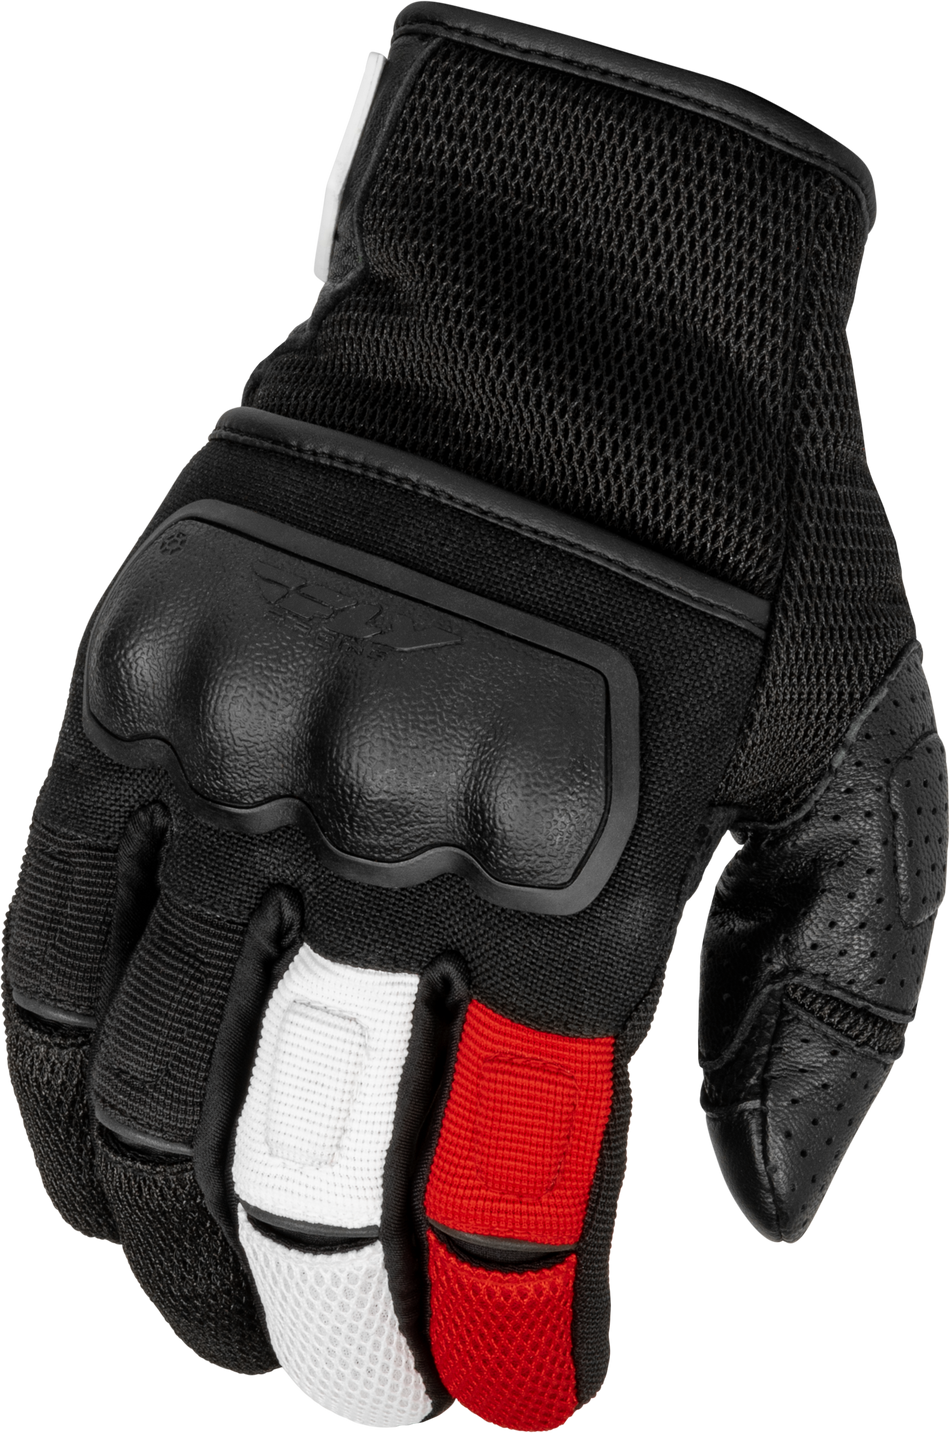 FLY RACING Coolpro Force Gloves Black/White/Red Xl 476-4127X